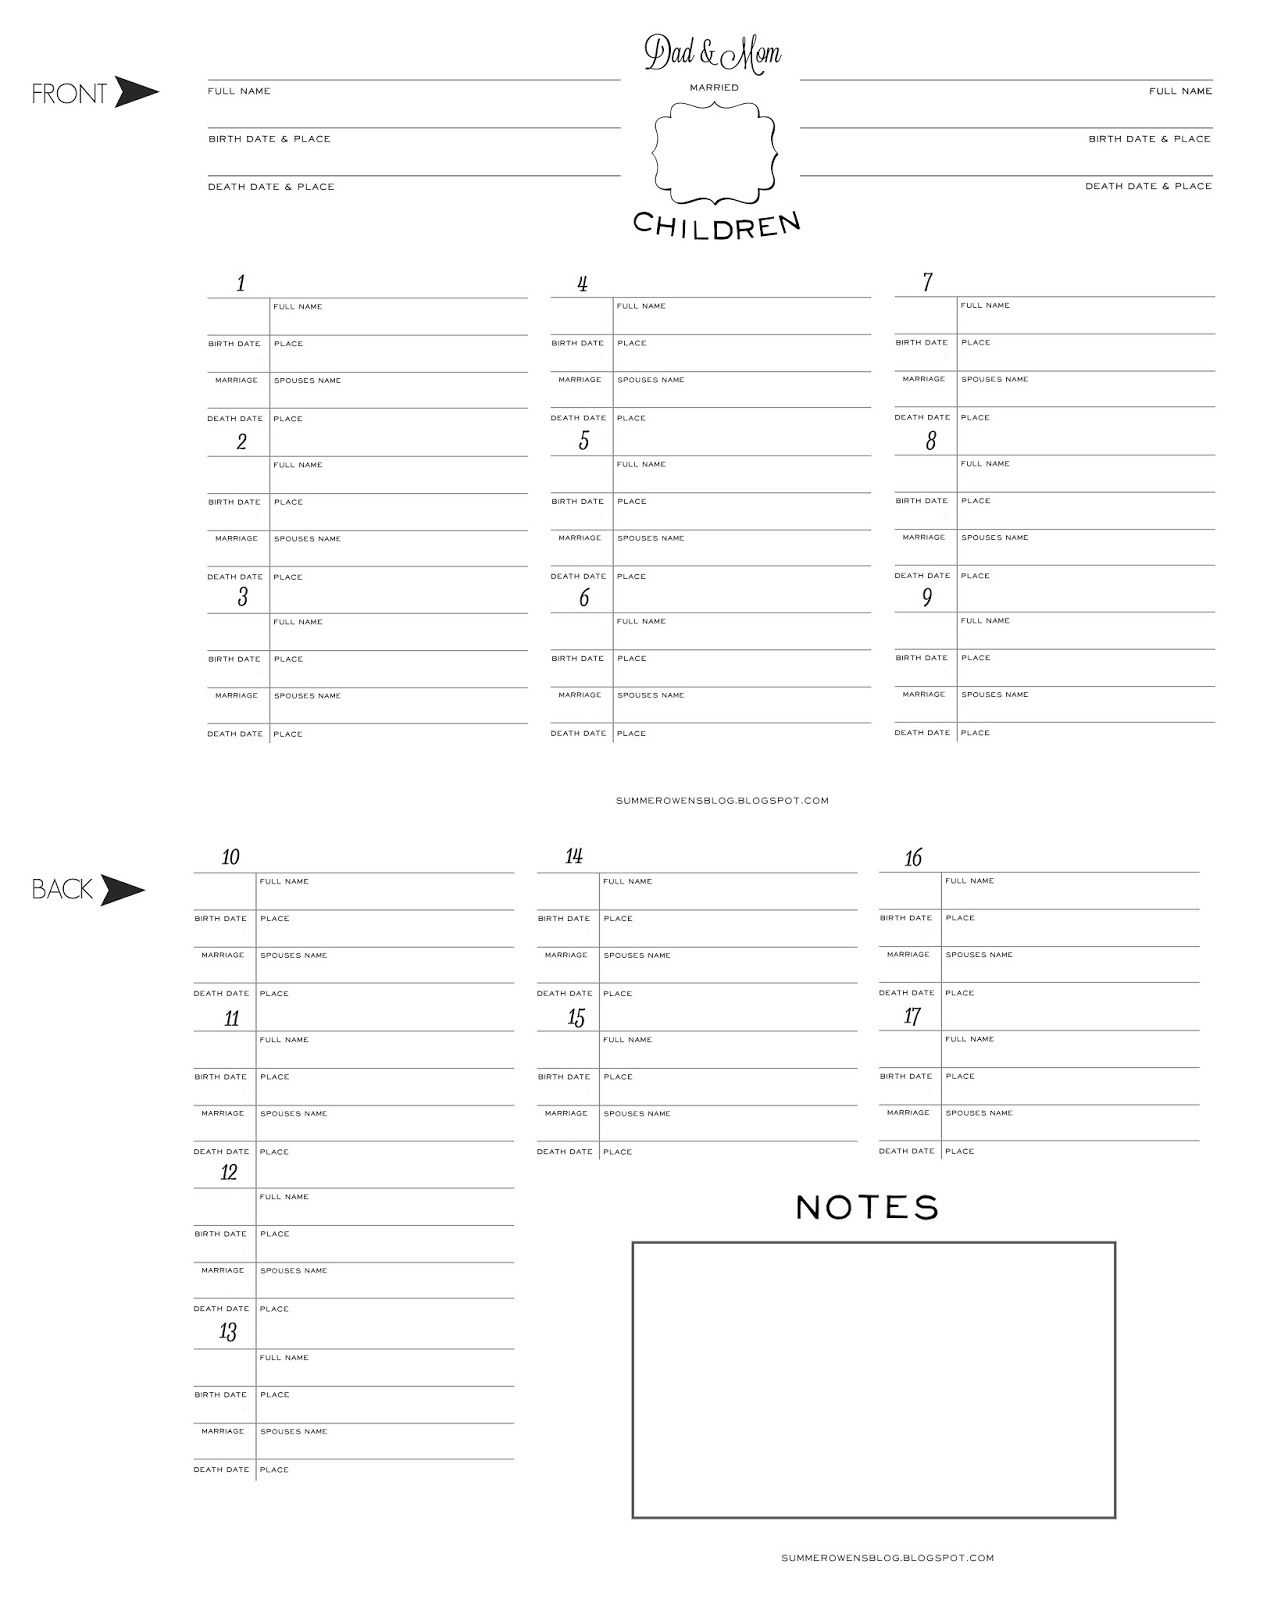 Free Printable - Family Group Sheet, Family Group Record, Extra - Free Printable Genealogy Worksheets